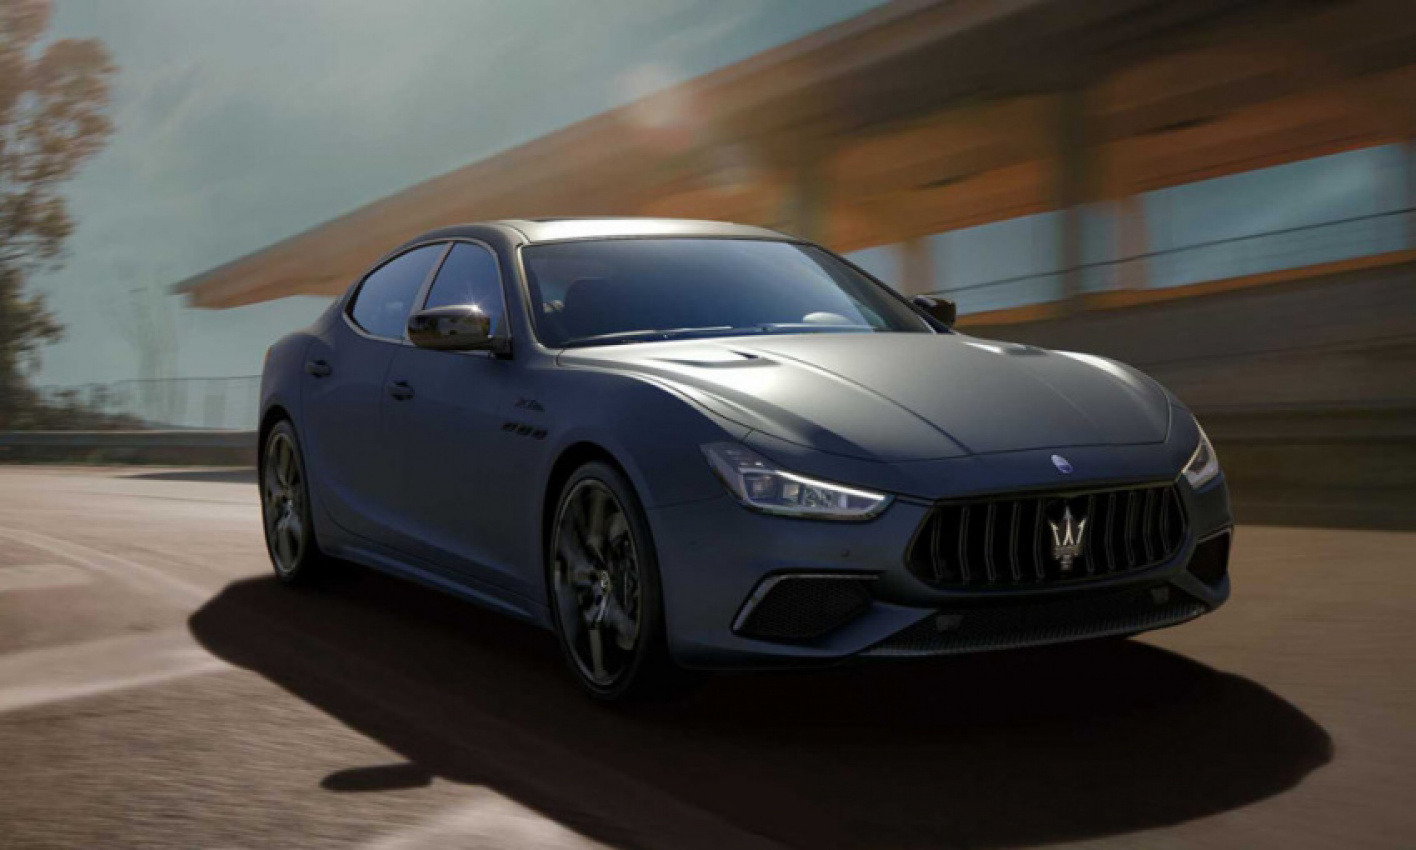 autos, cars, maserati, new models, maserati corse, maserati ghibli, maserati ghibli mc edition, maserati levante, maserati levante mc edition, maserati mc edition, maserati quattroporte, maserati quattroporte mc edition, targa florio, maserati mc editions come equipped with more sportiness